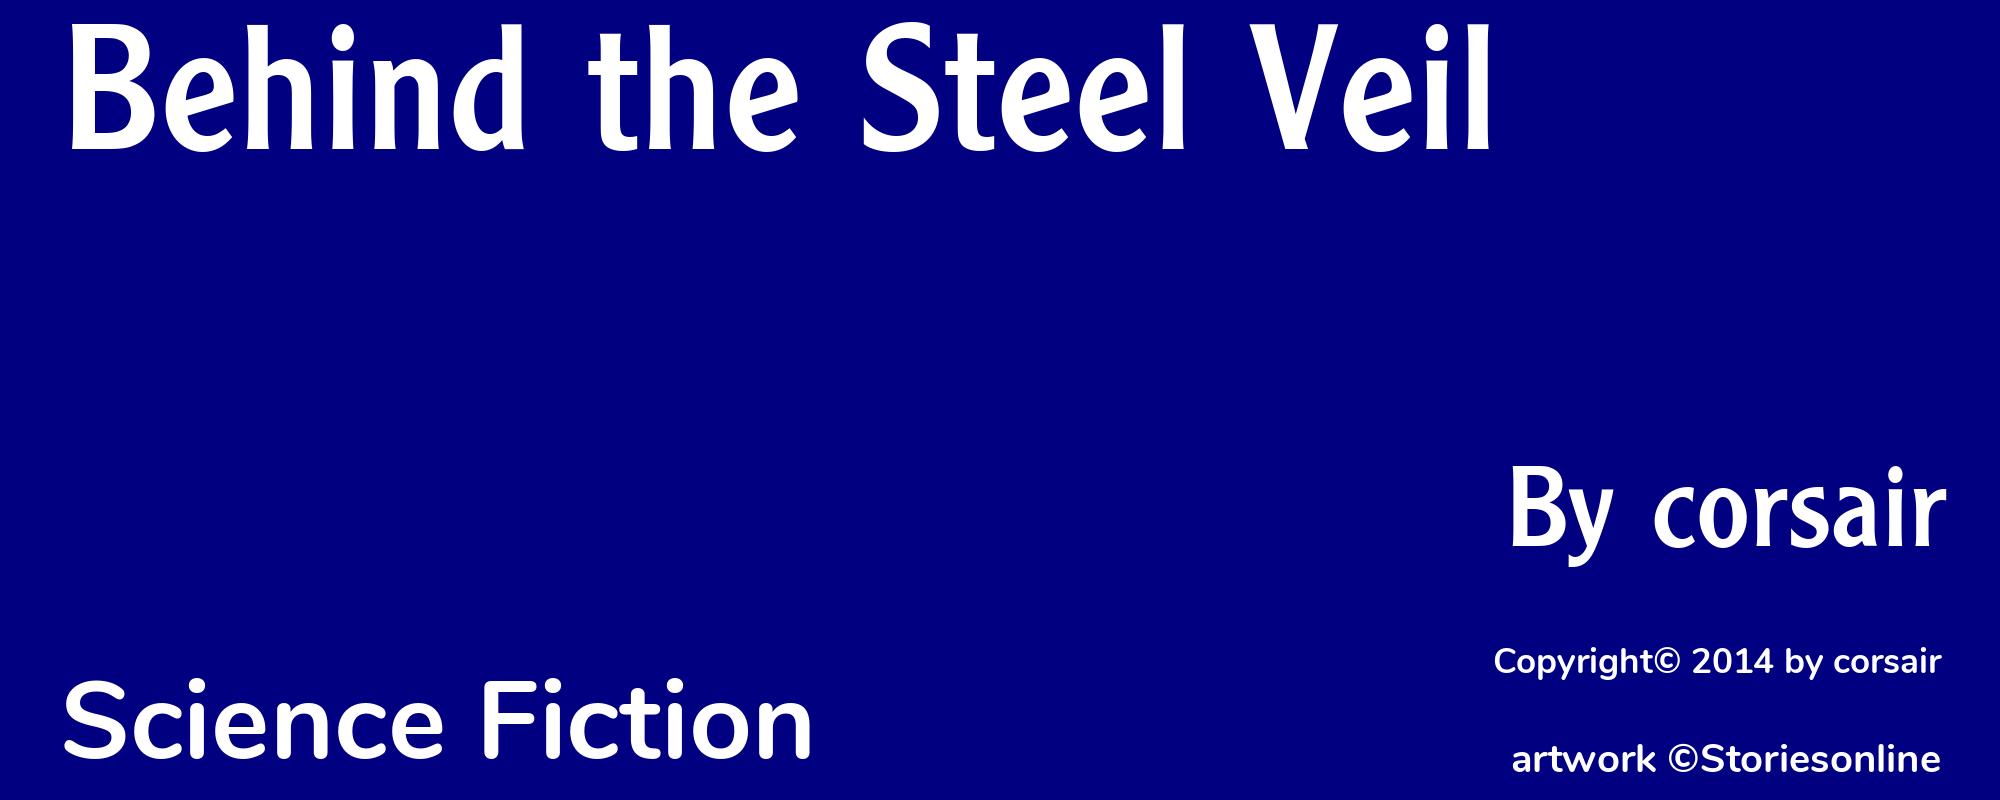 Behind the Steel Veil - Cover